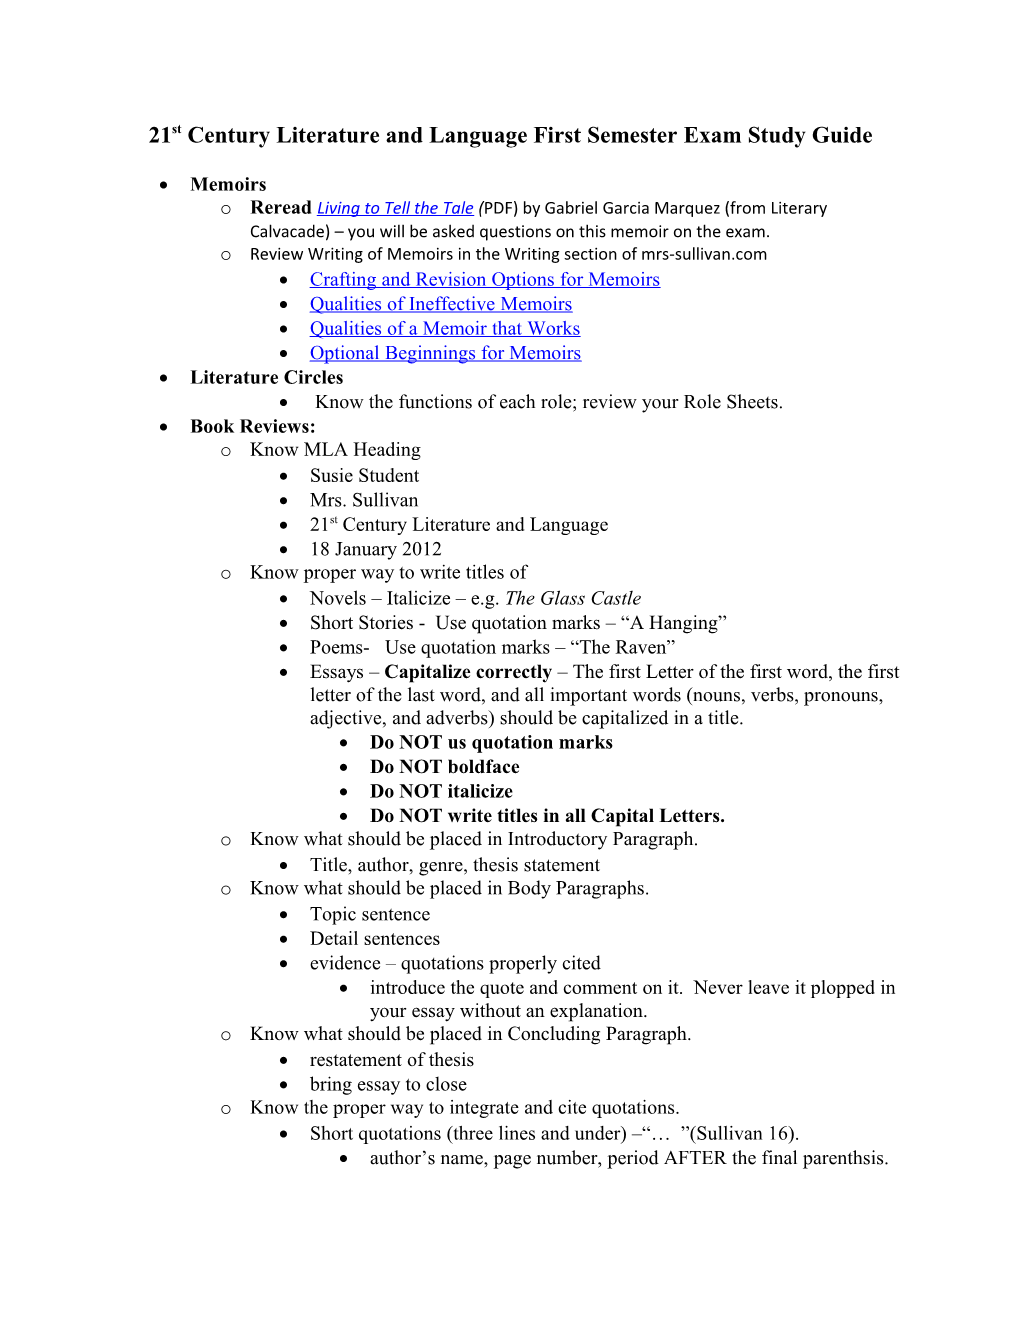 21St Century Literature and Language First Semester Exam Study Guide